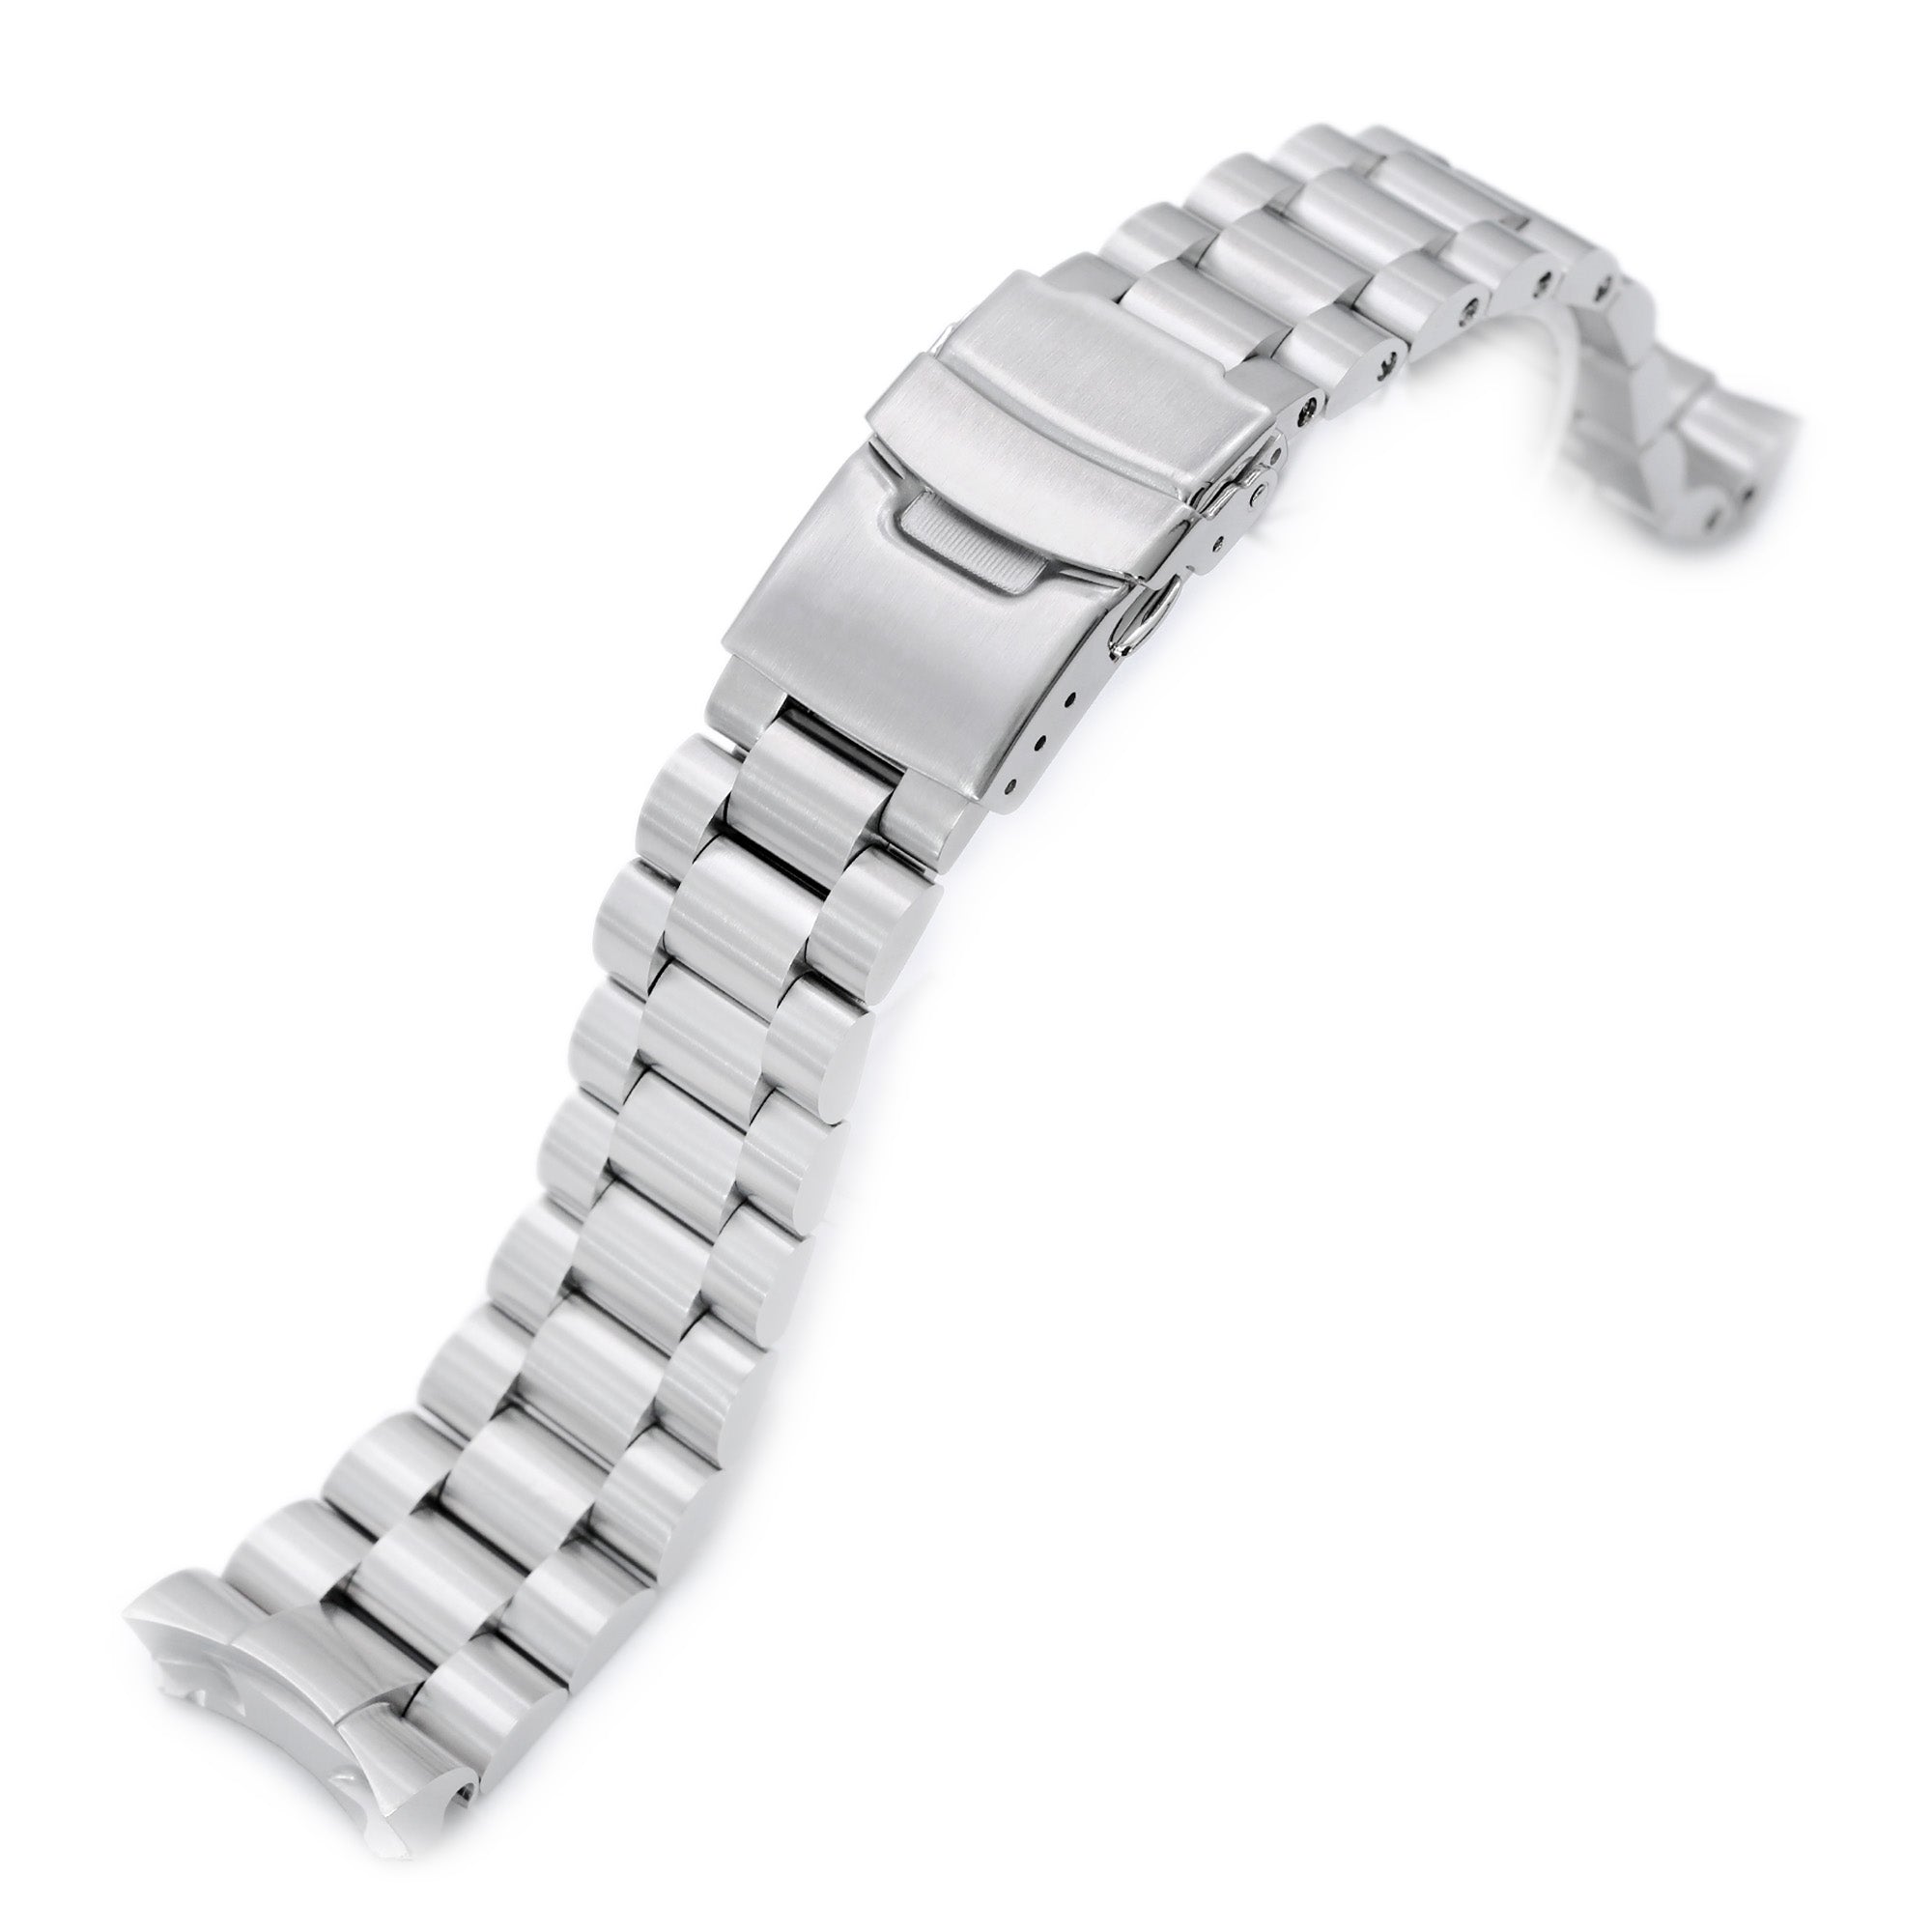 22mm Endmill watch band for SEIKO Diver SKX007, Brushed Solid Stainless Steel Strapcode Watch Bands